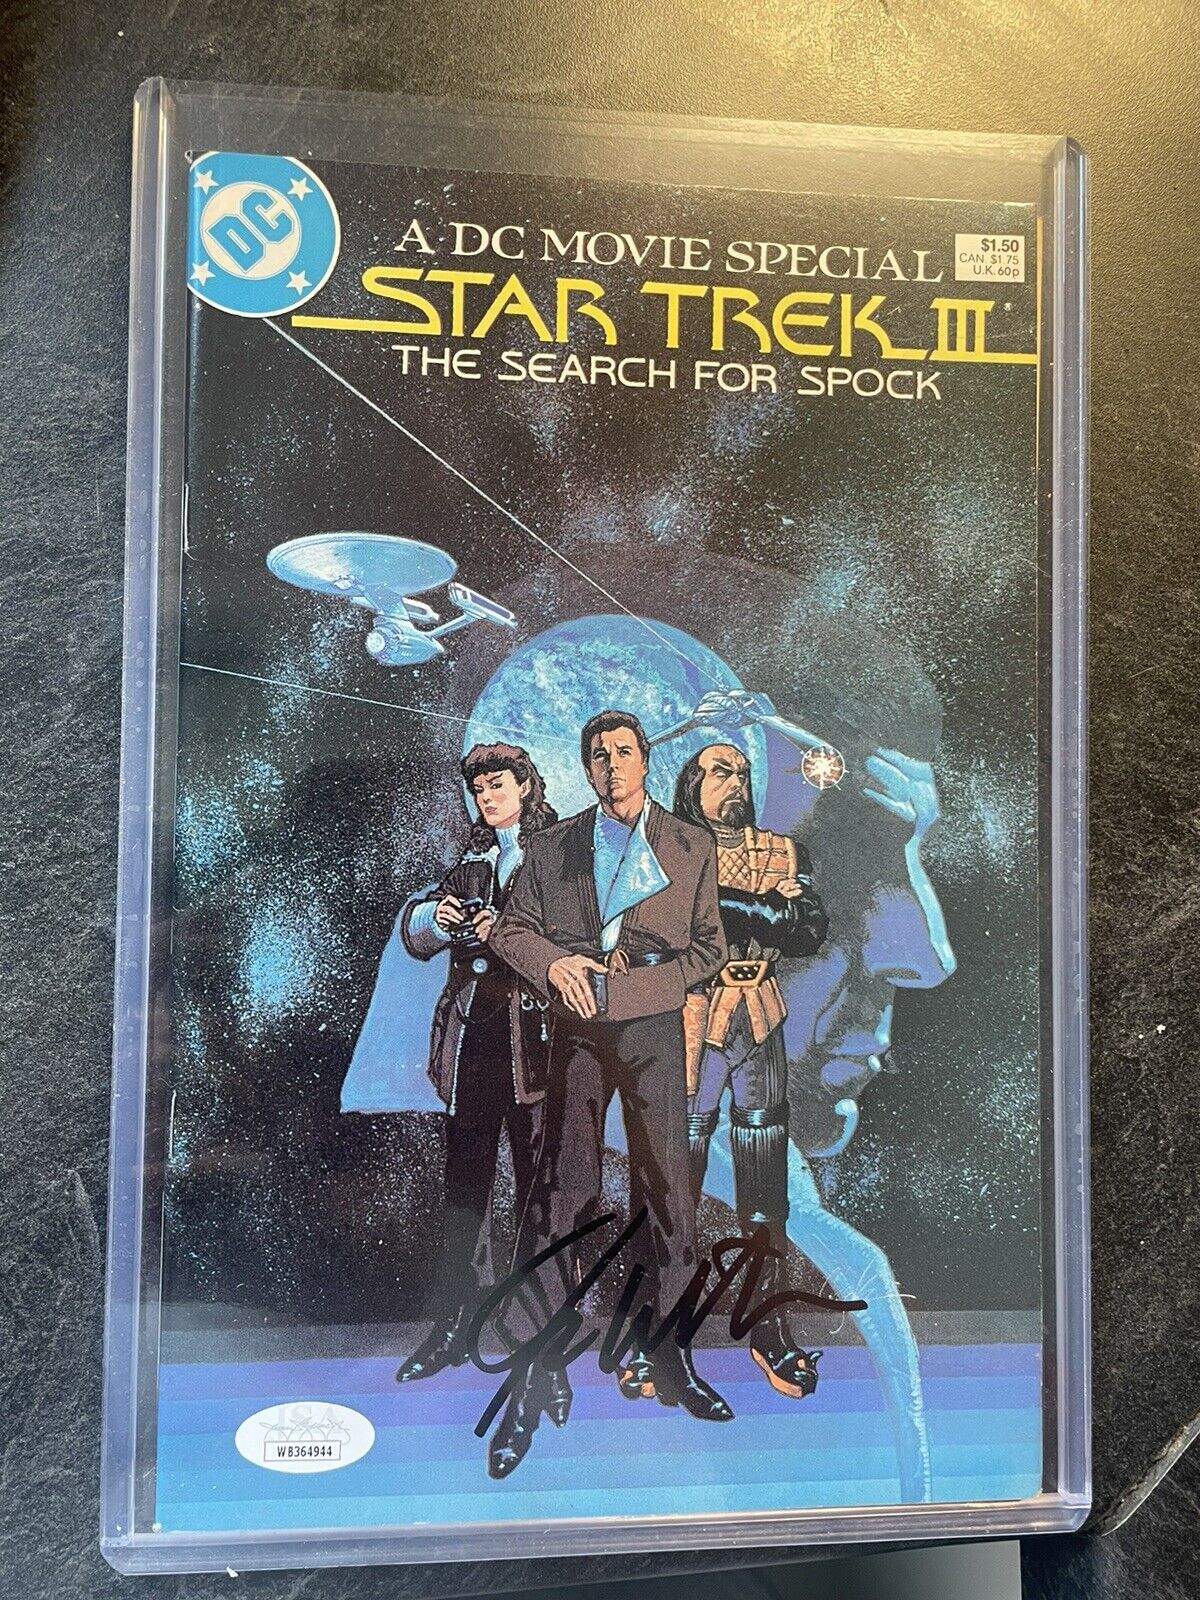 Star Trek III The Search for Spock  DC Signed By William Shatner JSA Certified